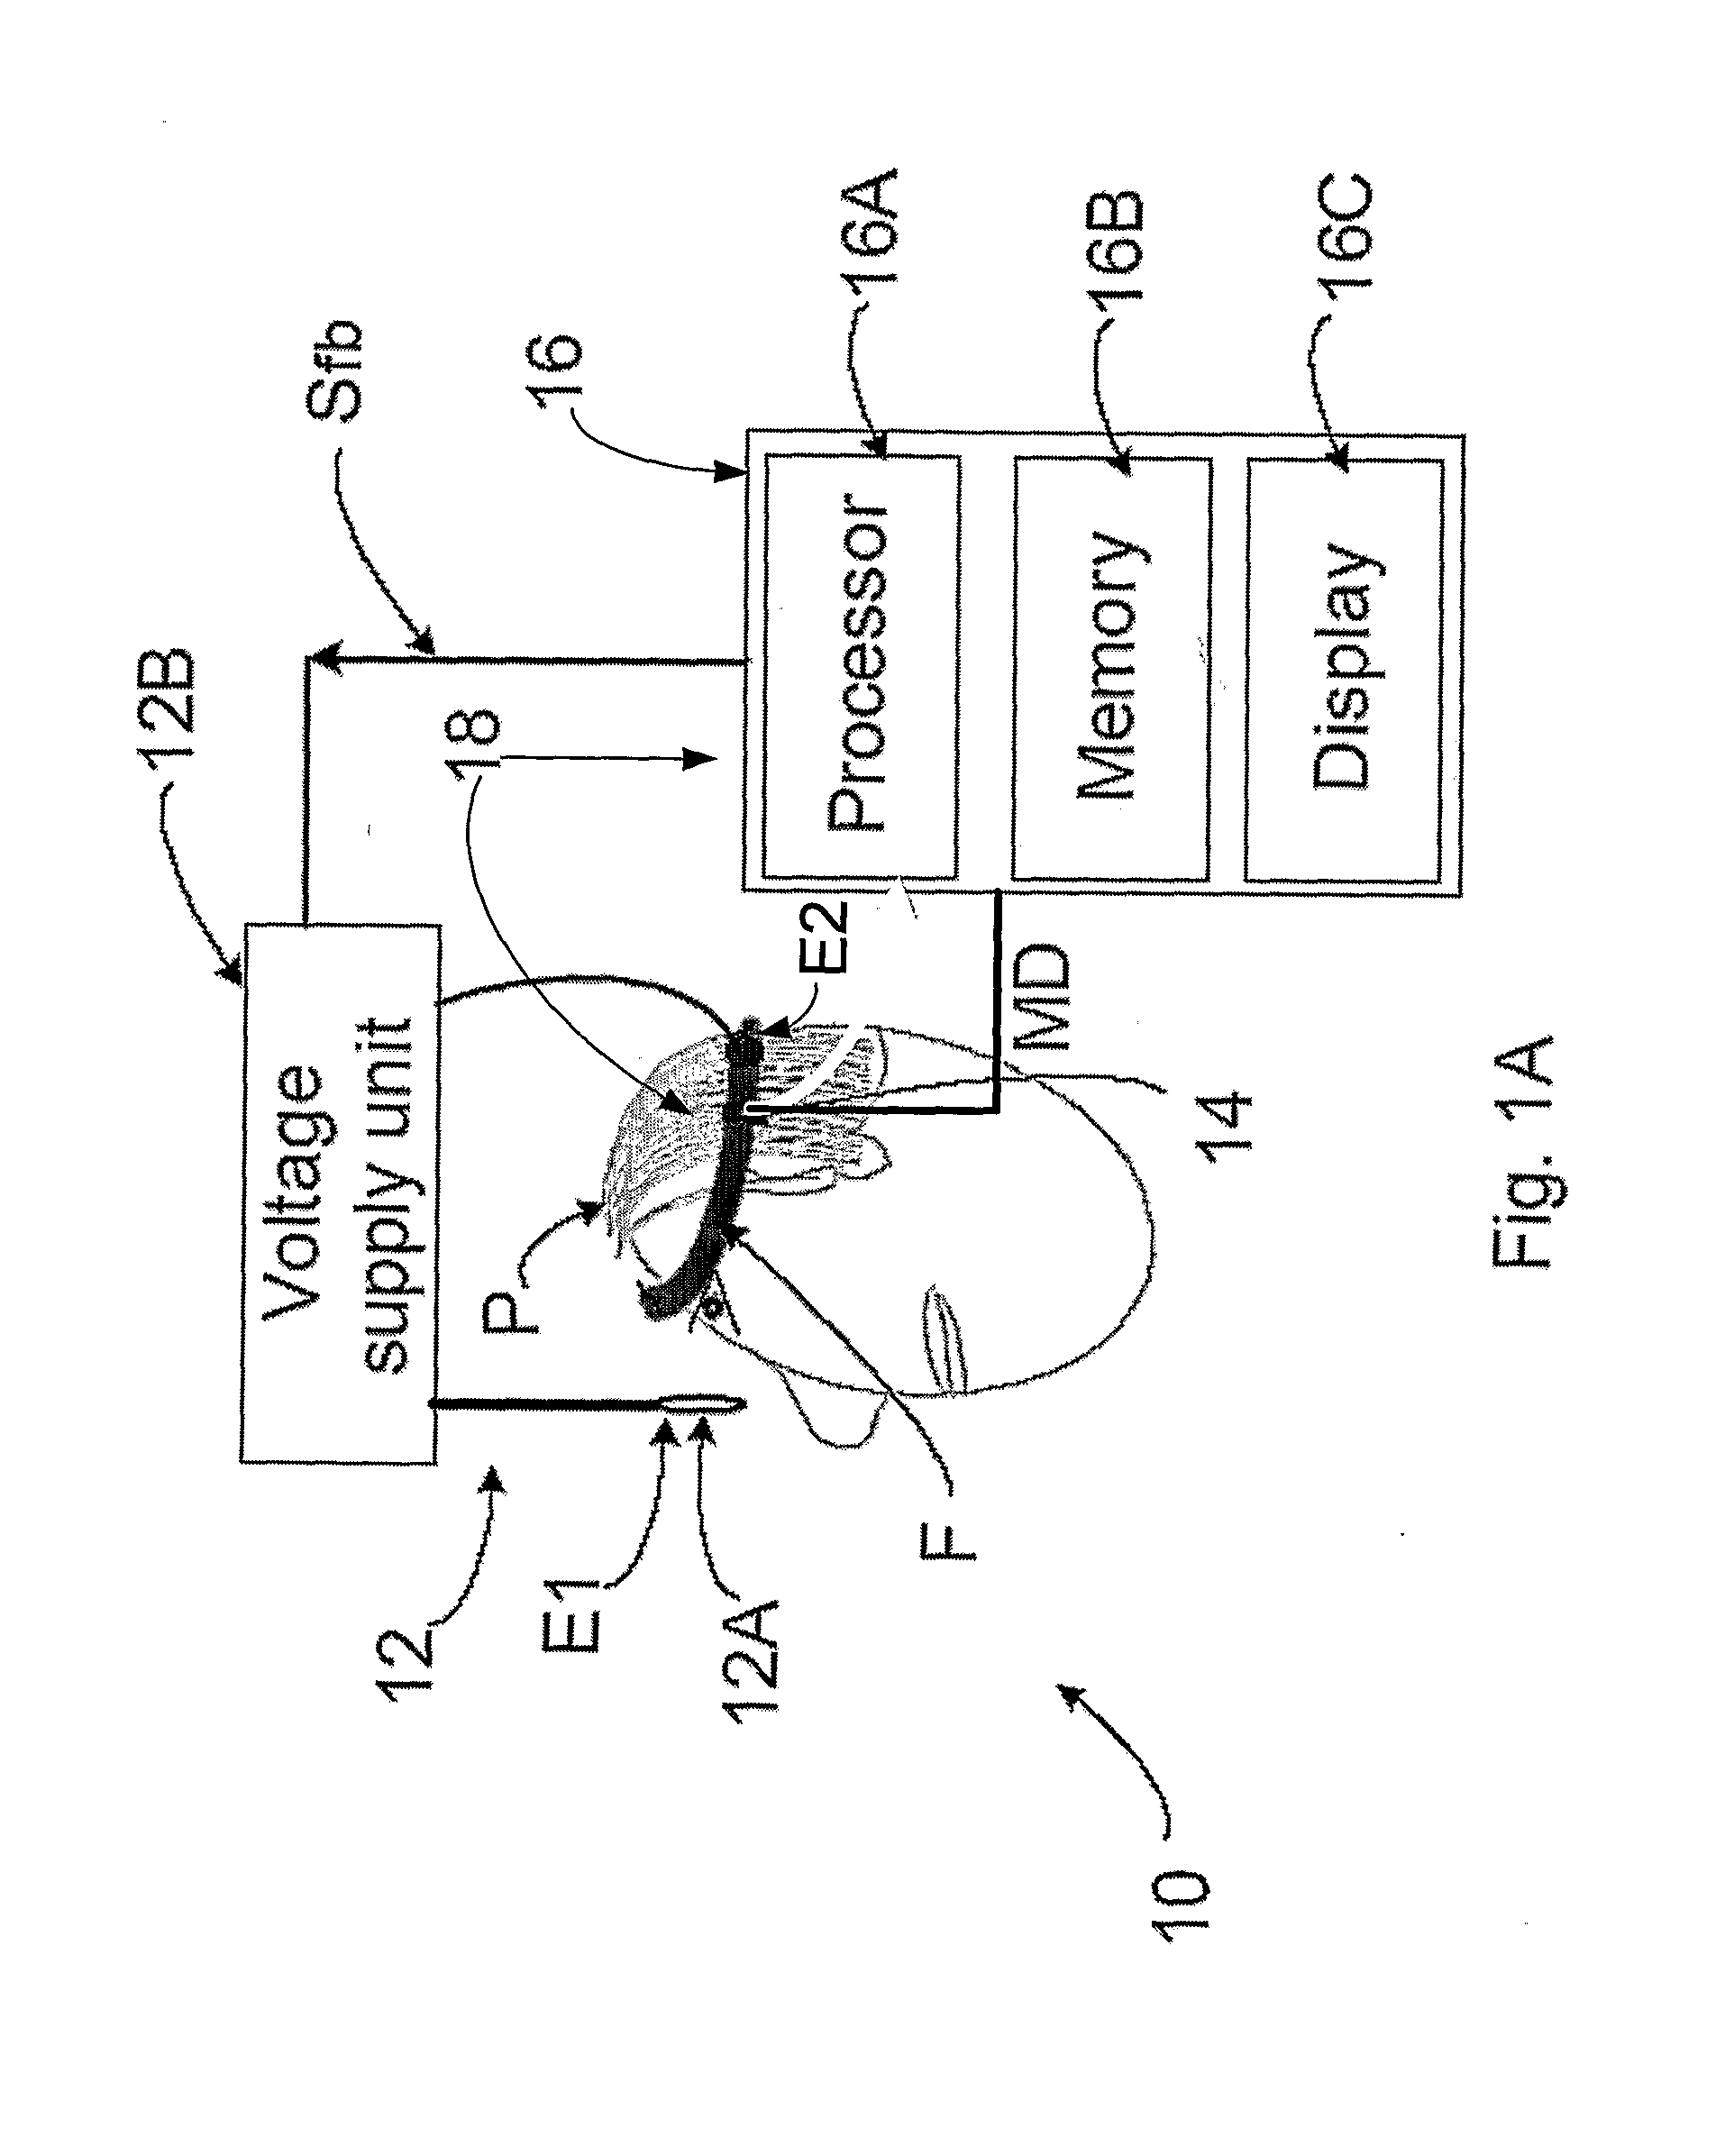 Device and Method for Pupil Size Modulation